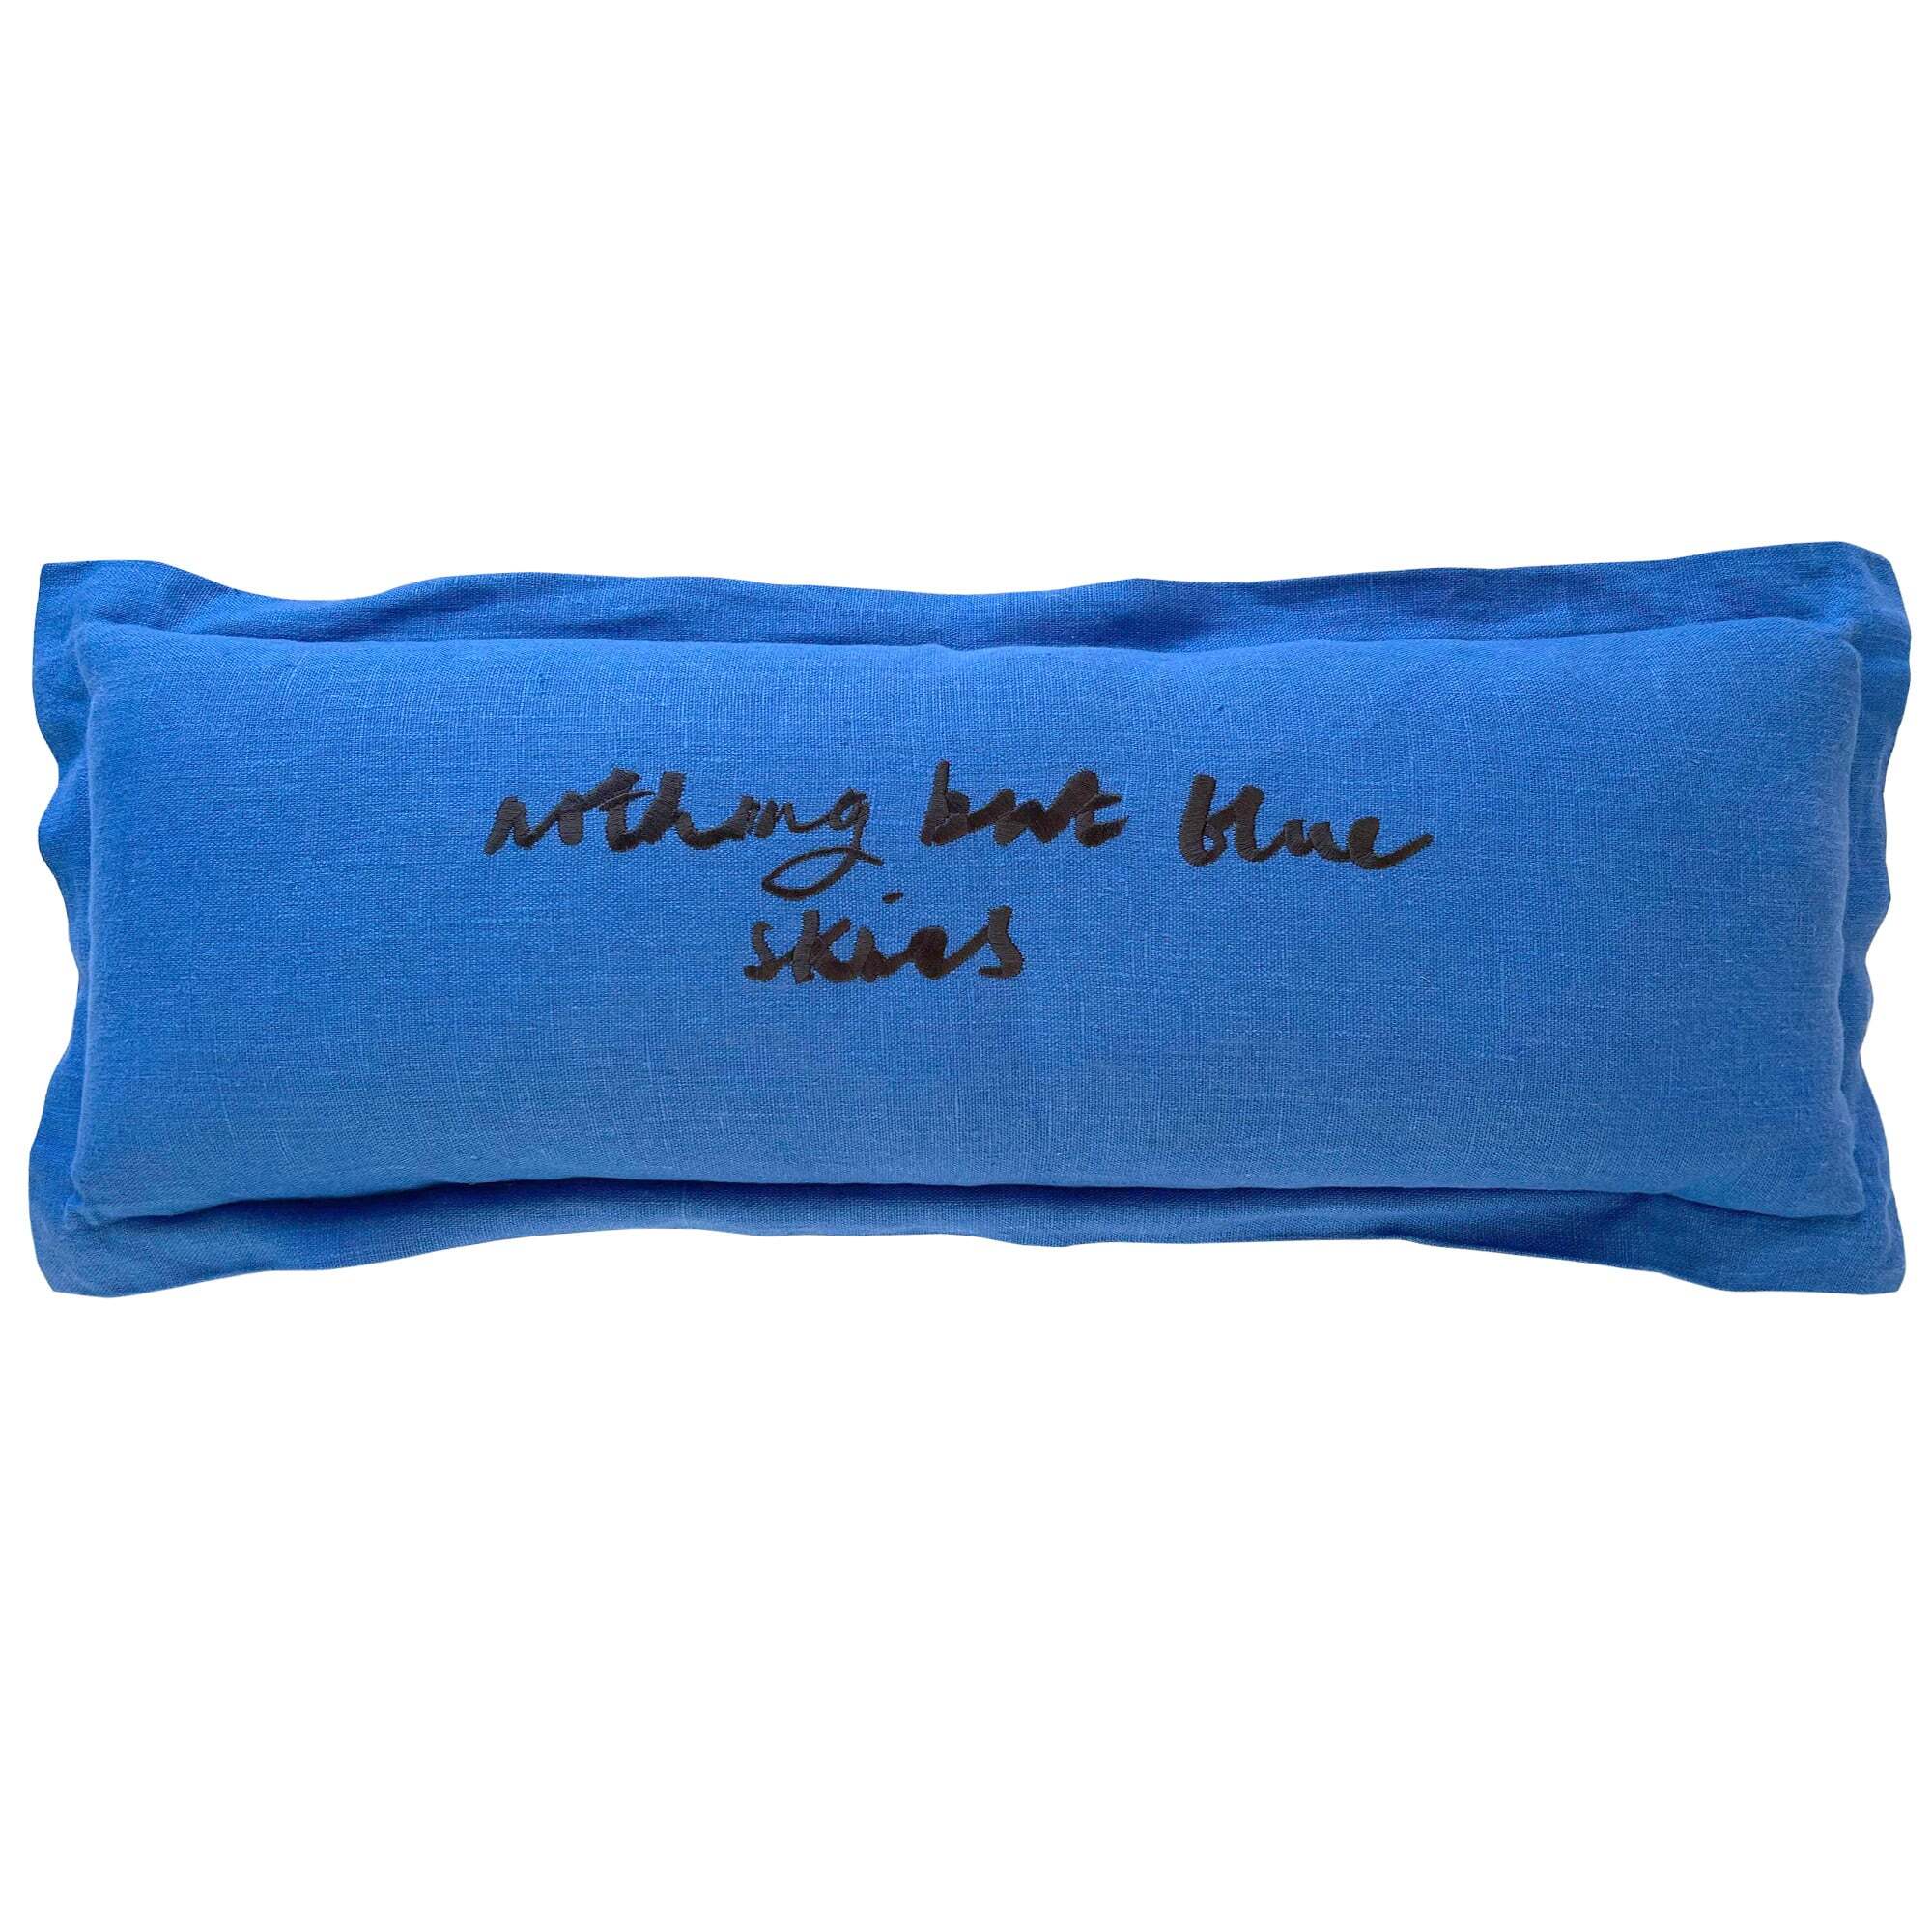 Studio-Ashby-Fine-Cell-Work-Linen-Cushion-Collaboration-Embroidered-Artist-Quotes-Blue.jpg